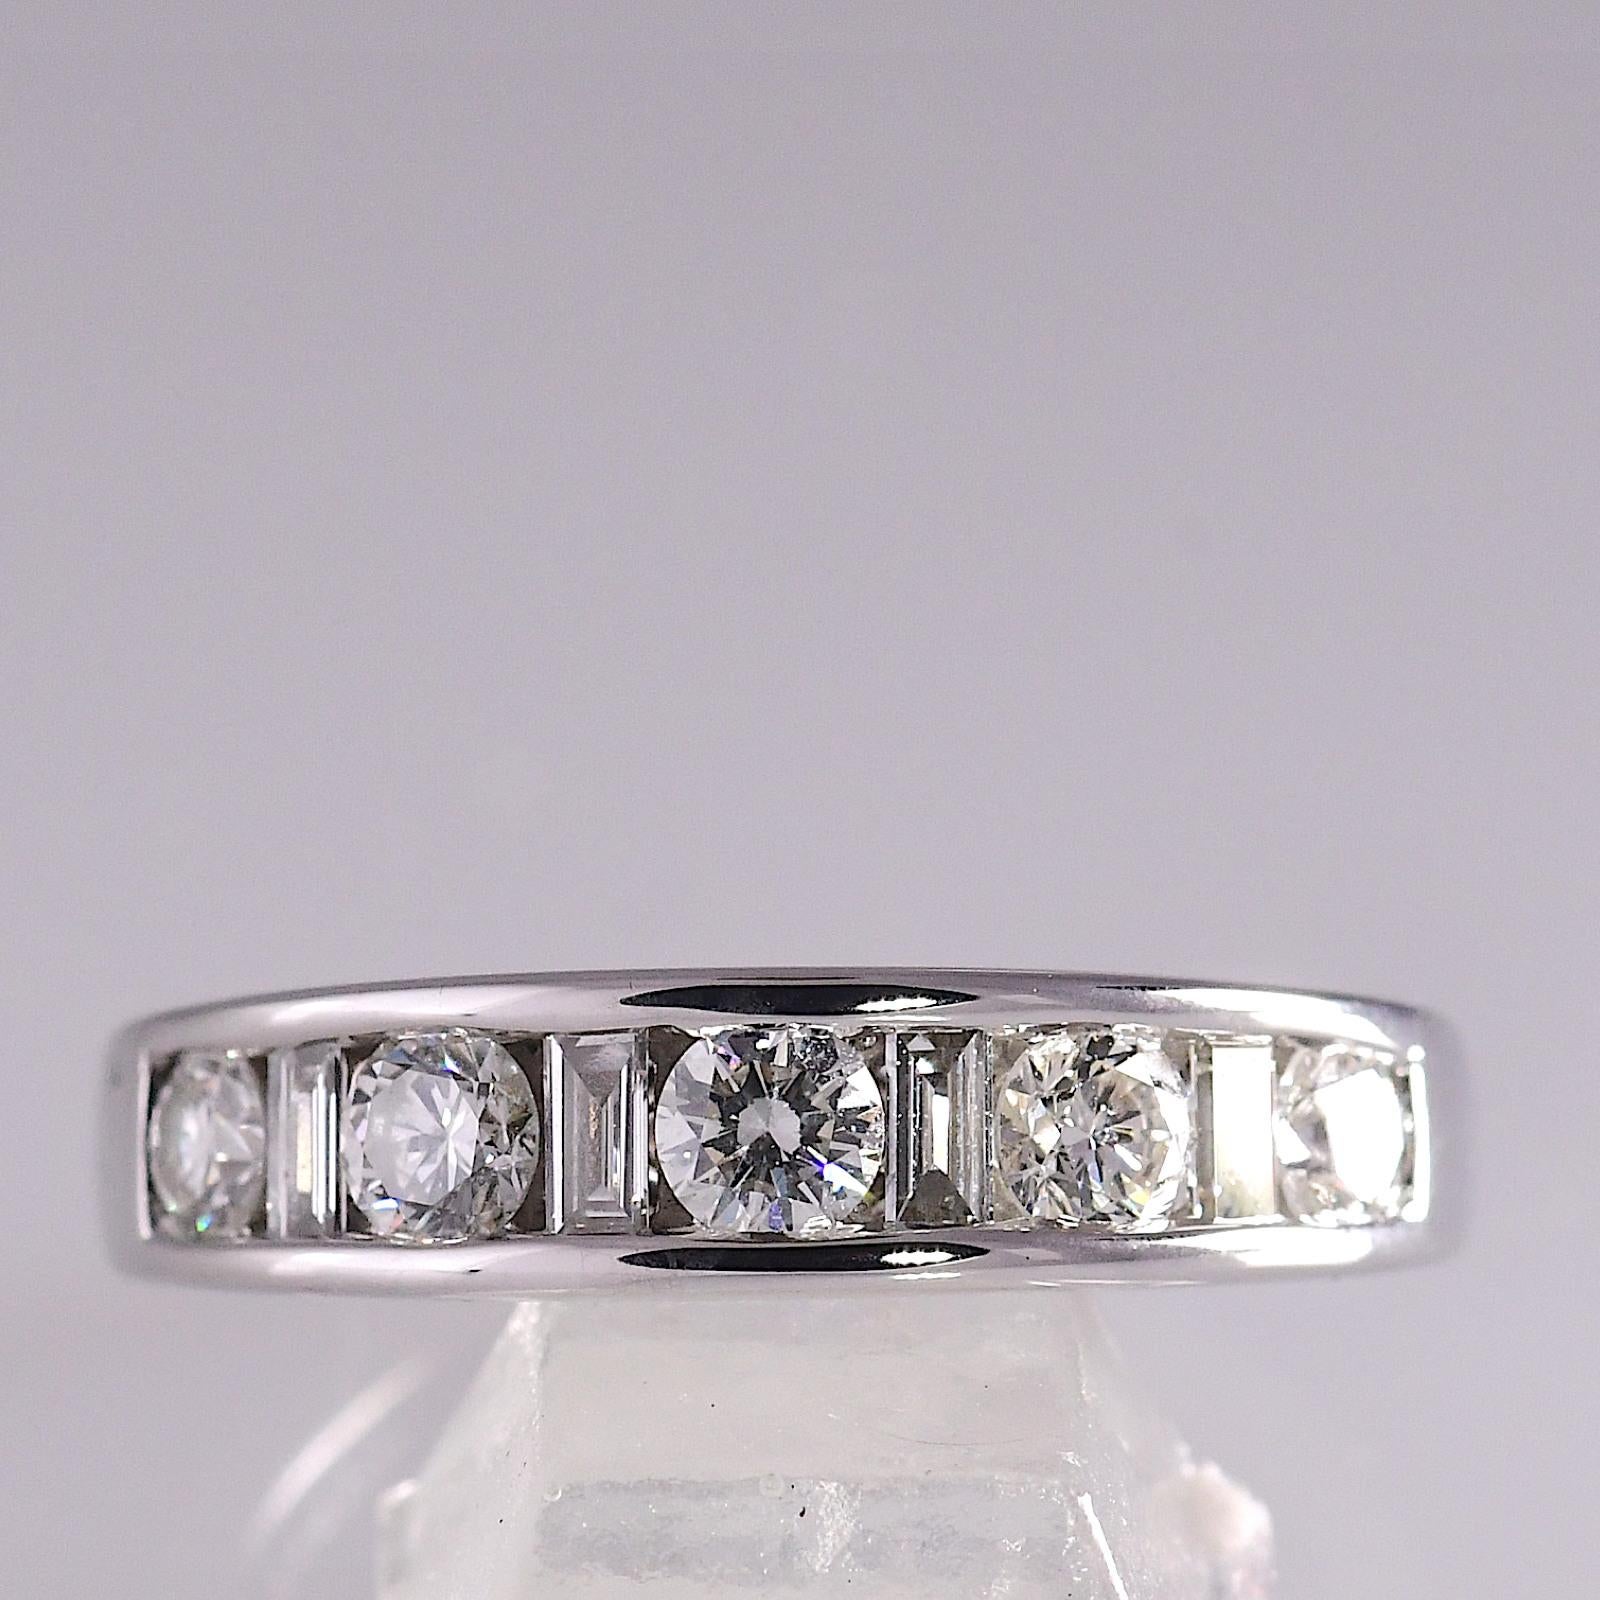 .72 TCW Natural Diamond White Gold 14K Anniversary Band 4.60 grams

Stones: Natural Diamond   TCW: .72   Color: H-K   Clarity: VS1-SI2   
Shape: Round / Baguette 
Metal: White Gold 
Purity: 14K 
Style: Anniversary/Wedding Band 
Total Gram Weight: